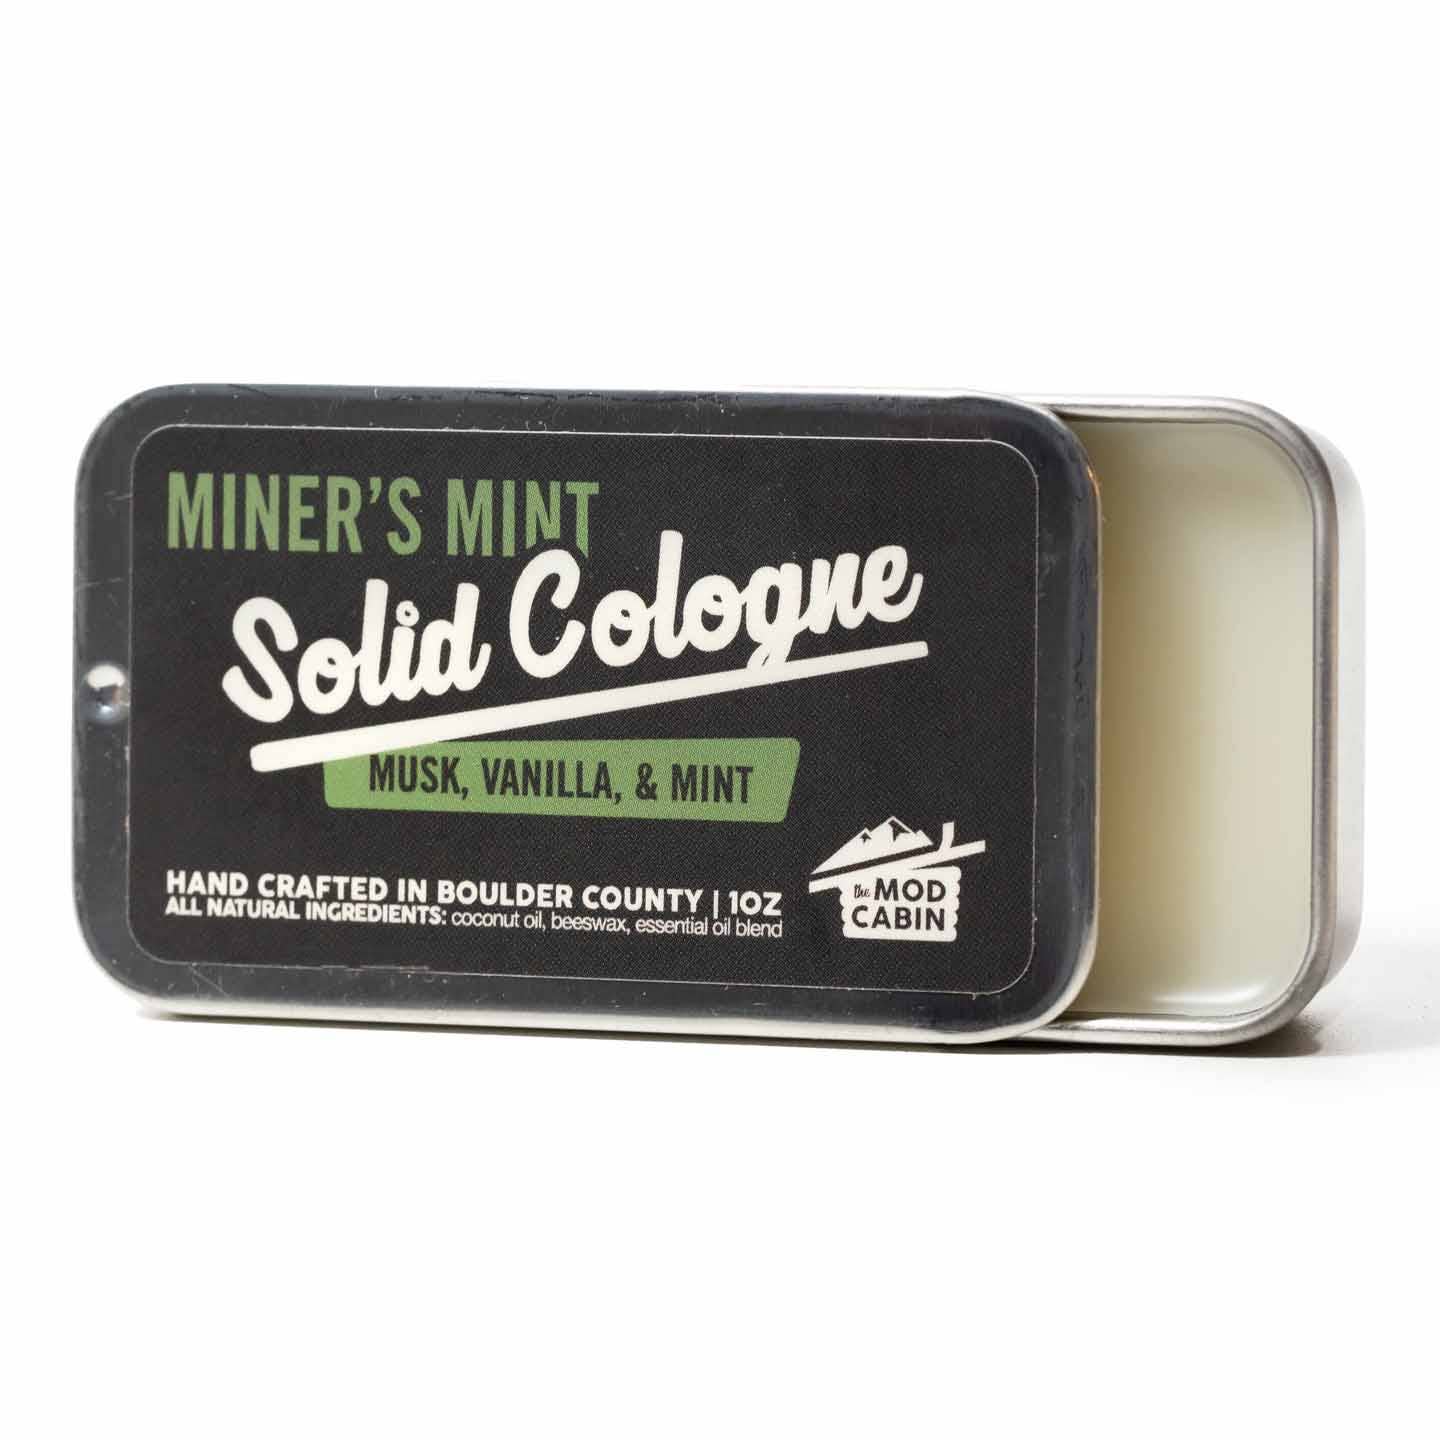 Solid Cologne - Miner's Mint - by The Mod Cabin